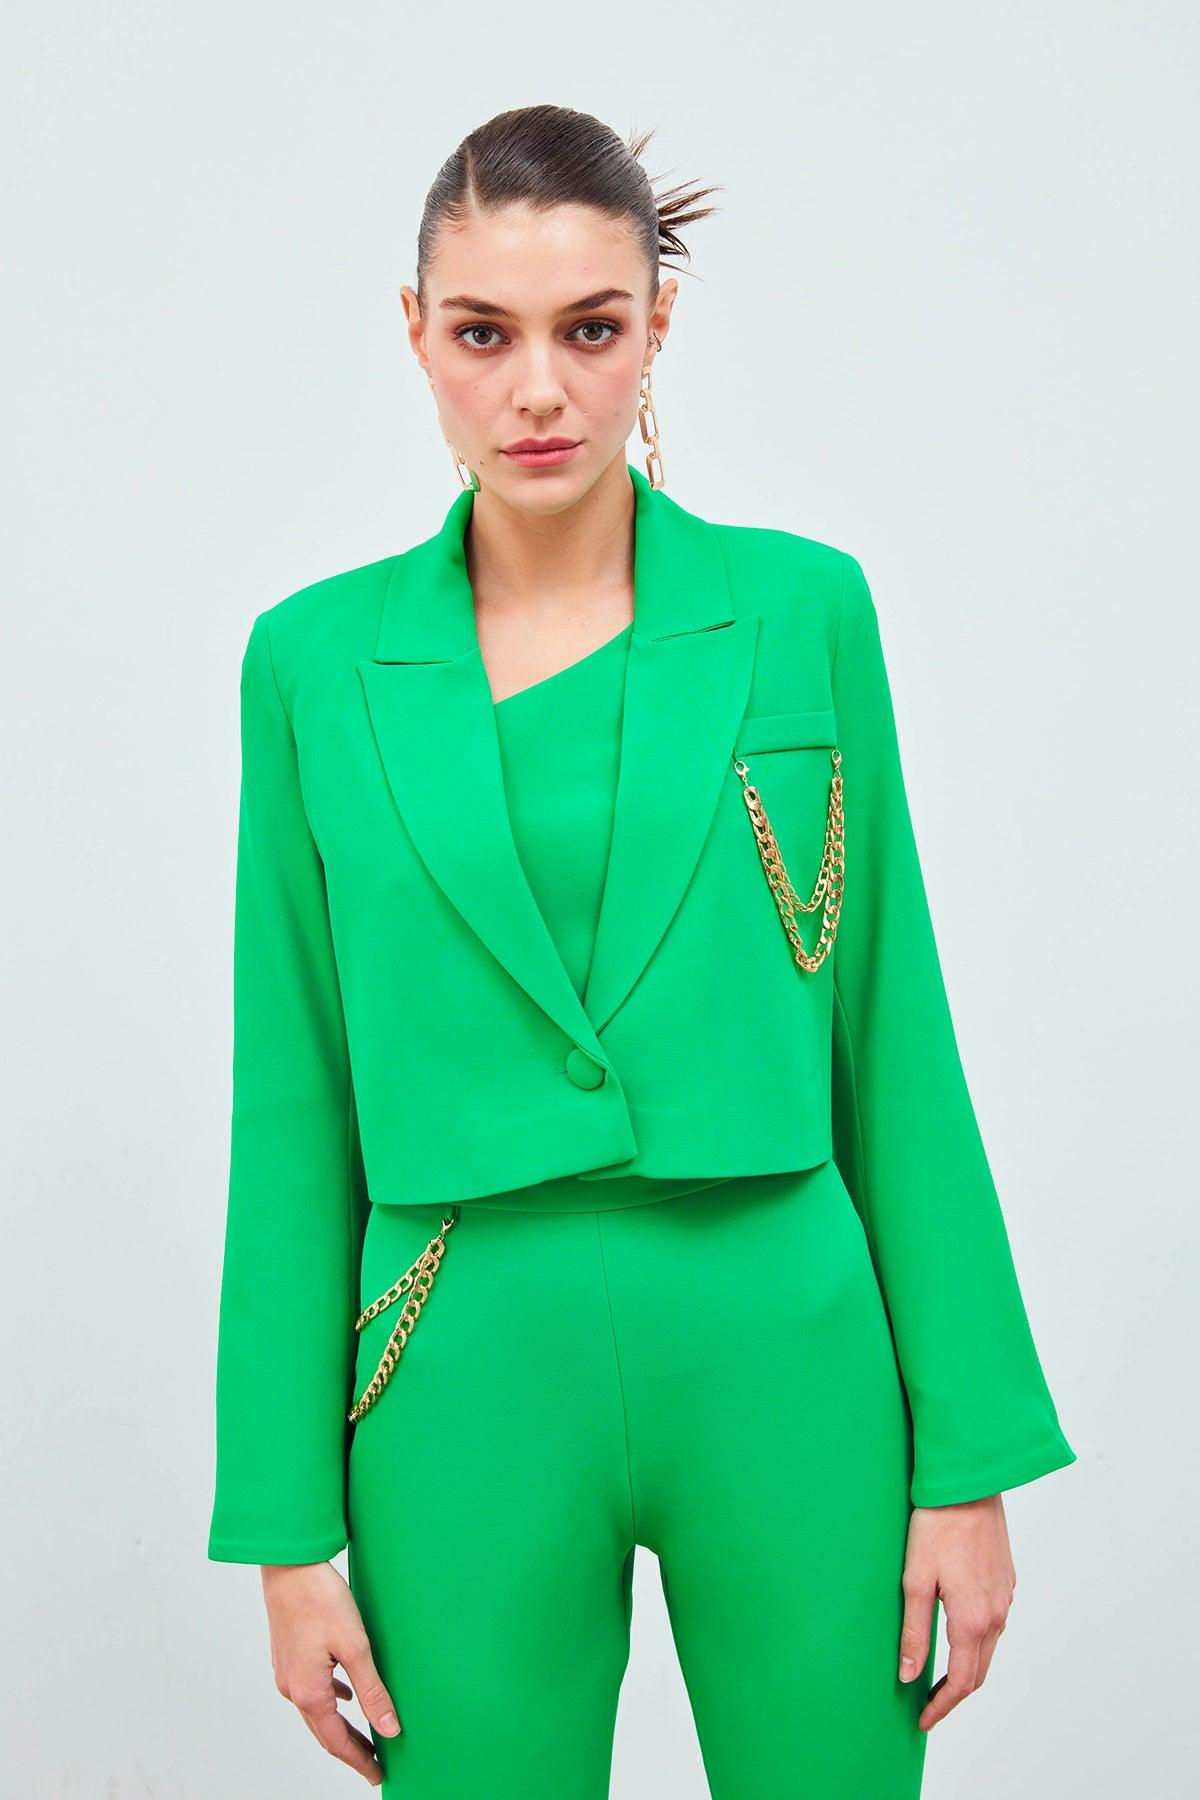 Wide Sleeve Detailed Accessory Jacket Green / S / 4 ZEFASH